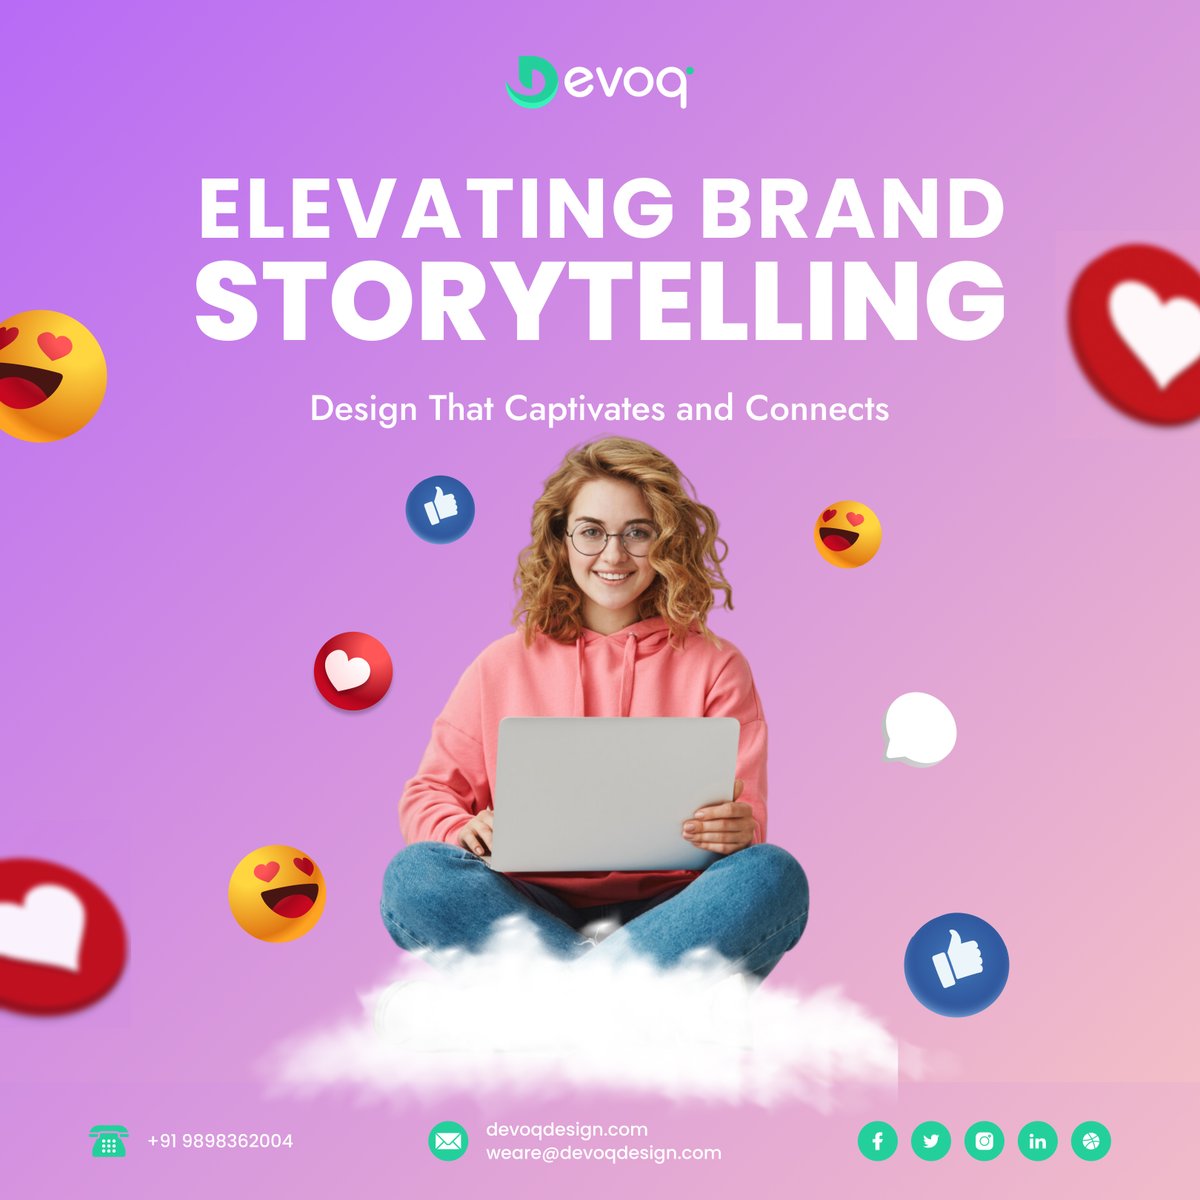 'We're the UI/UX designers who believe storytelling shouldn't be a snoozefest. Let's make your brand story so engaging, users will forget they're just using an app.' Visit our website for more details : devoqdesign.com Email Us : sales@devoqdesign.com #UIUX #UXUI